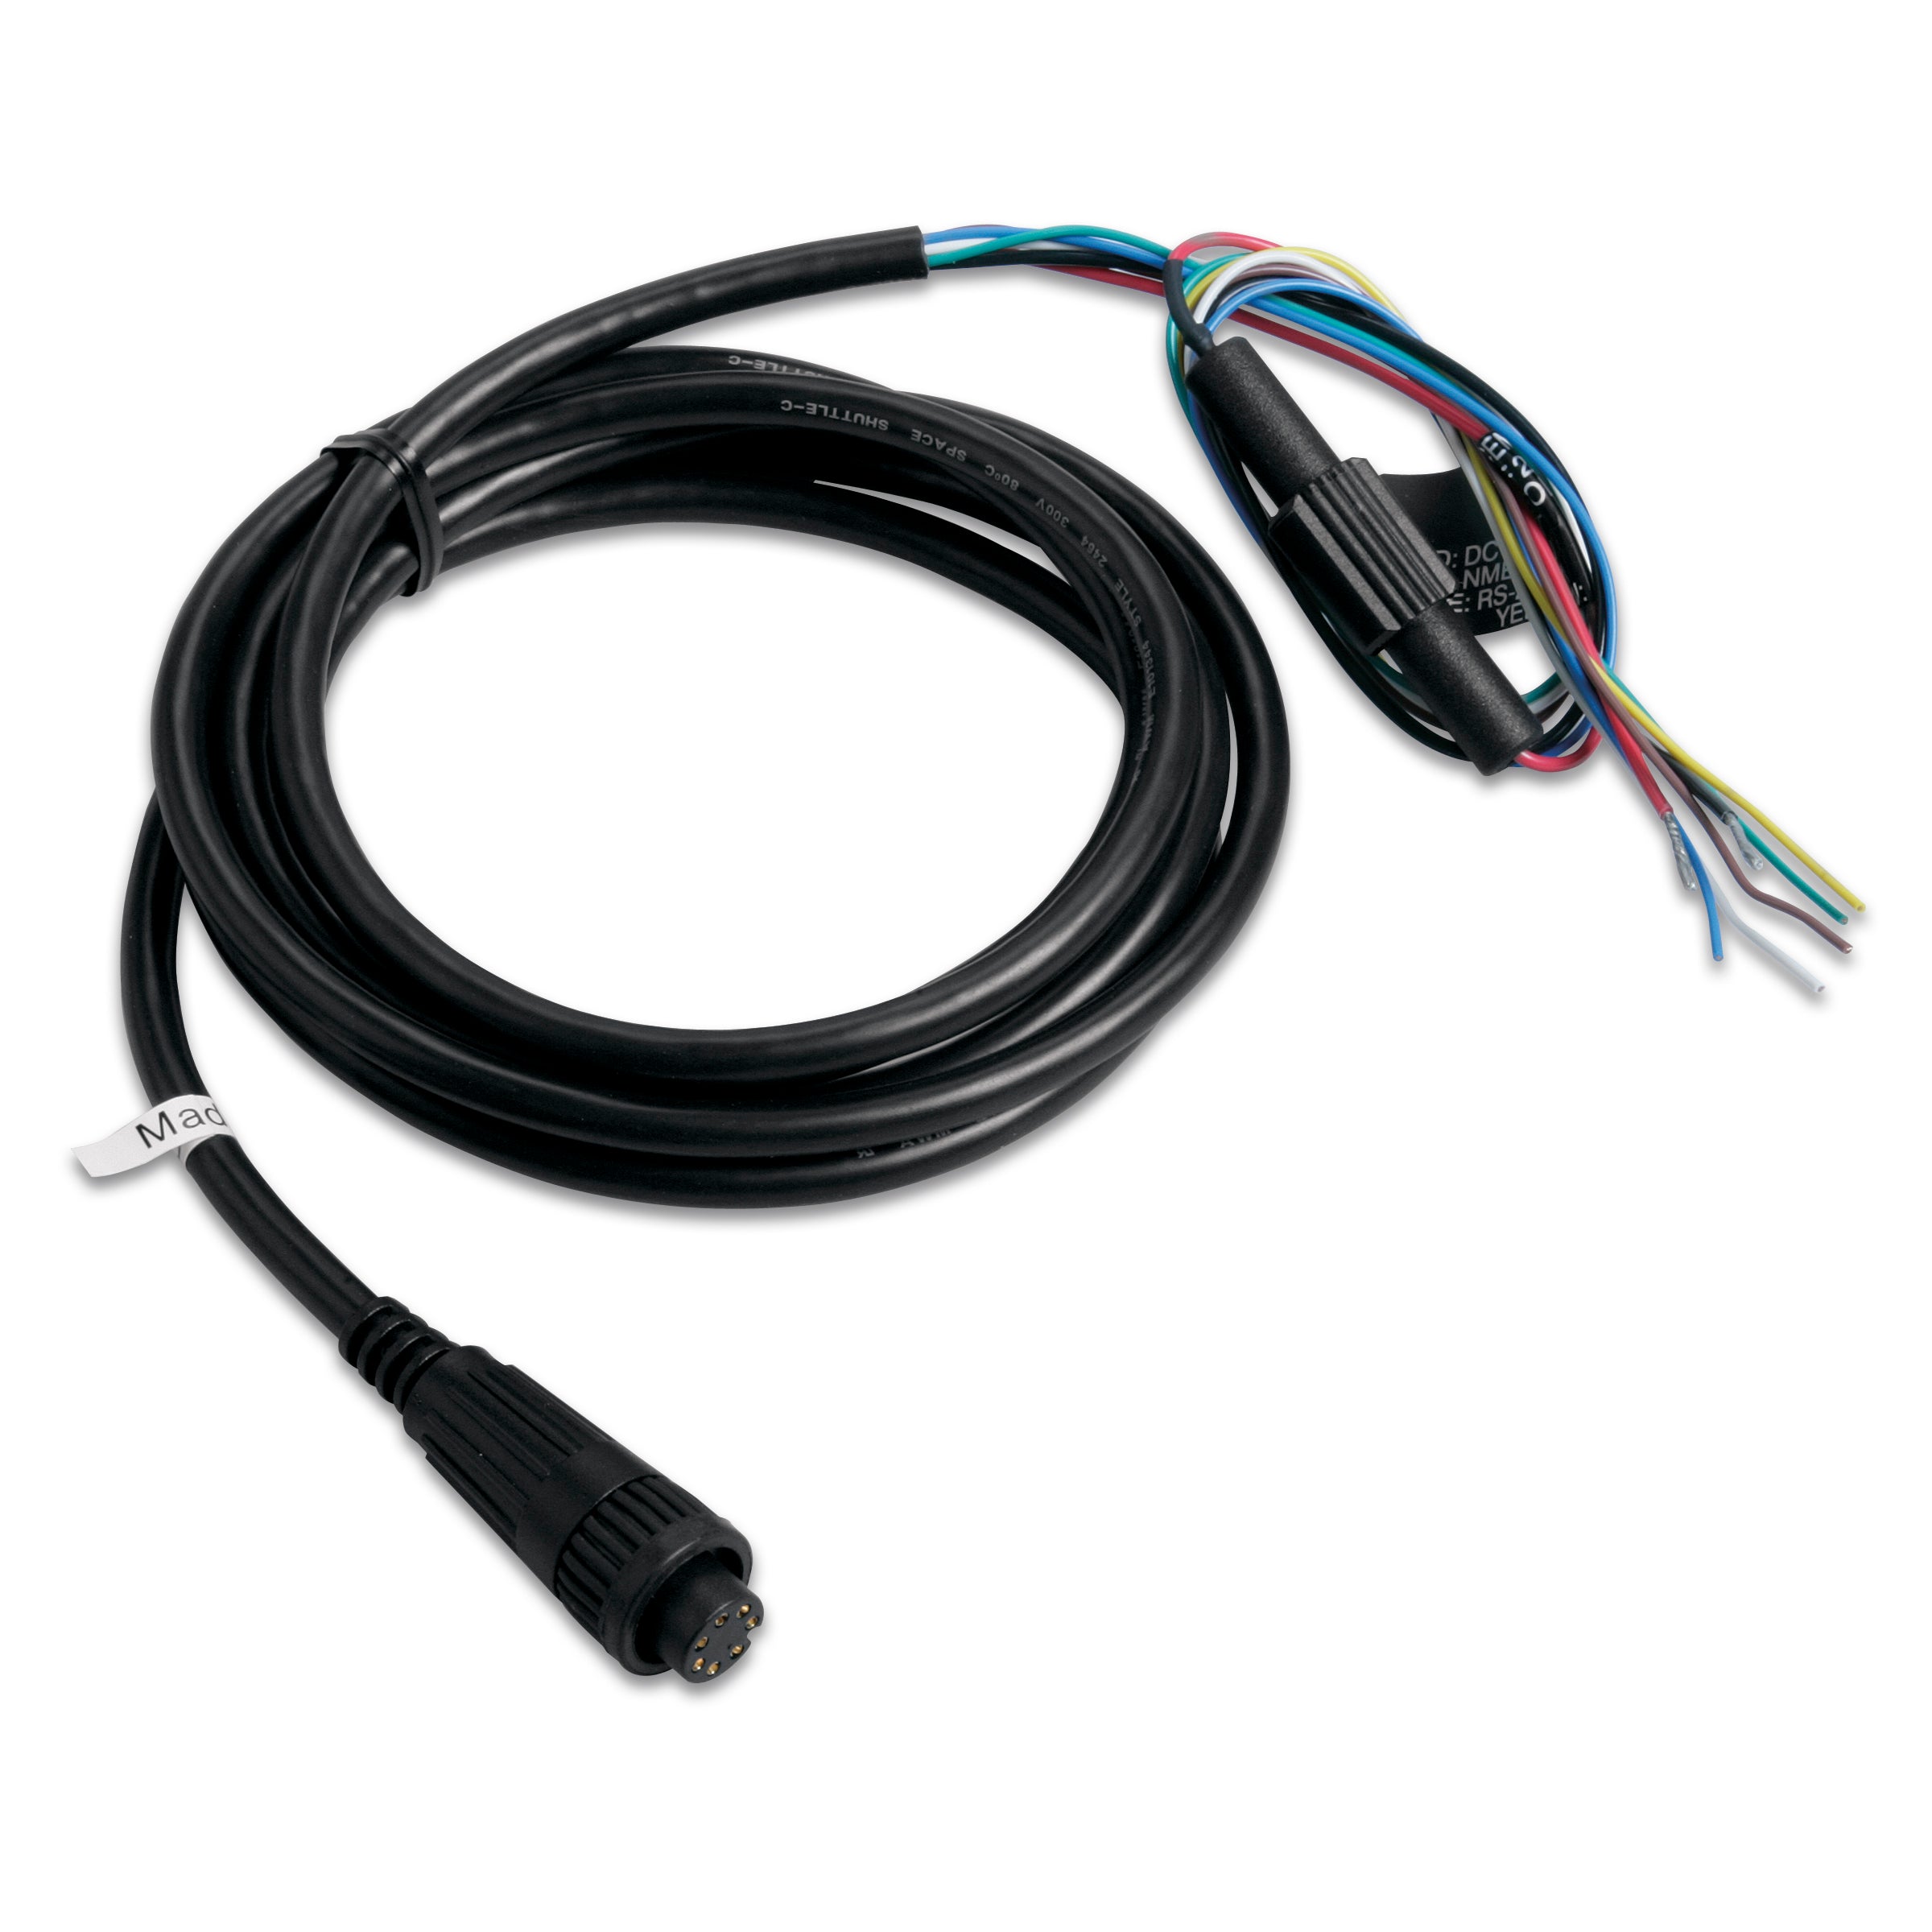 Garmin Power/Data Cable (Wires Only)